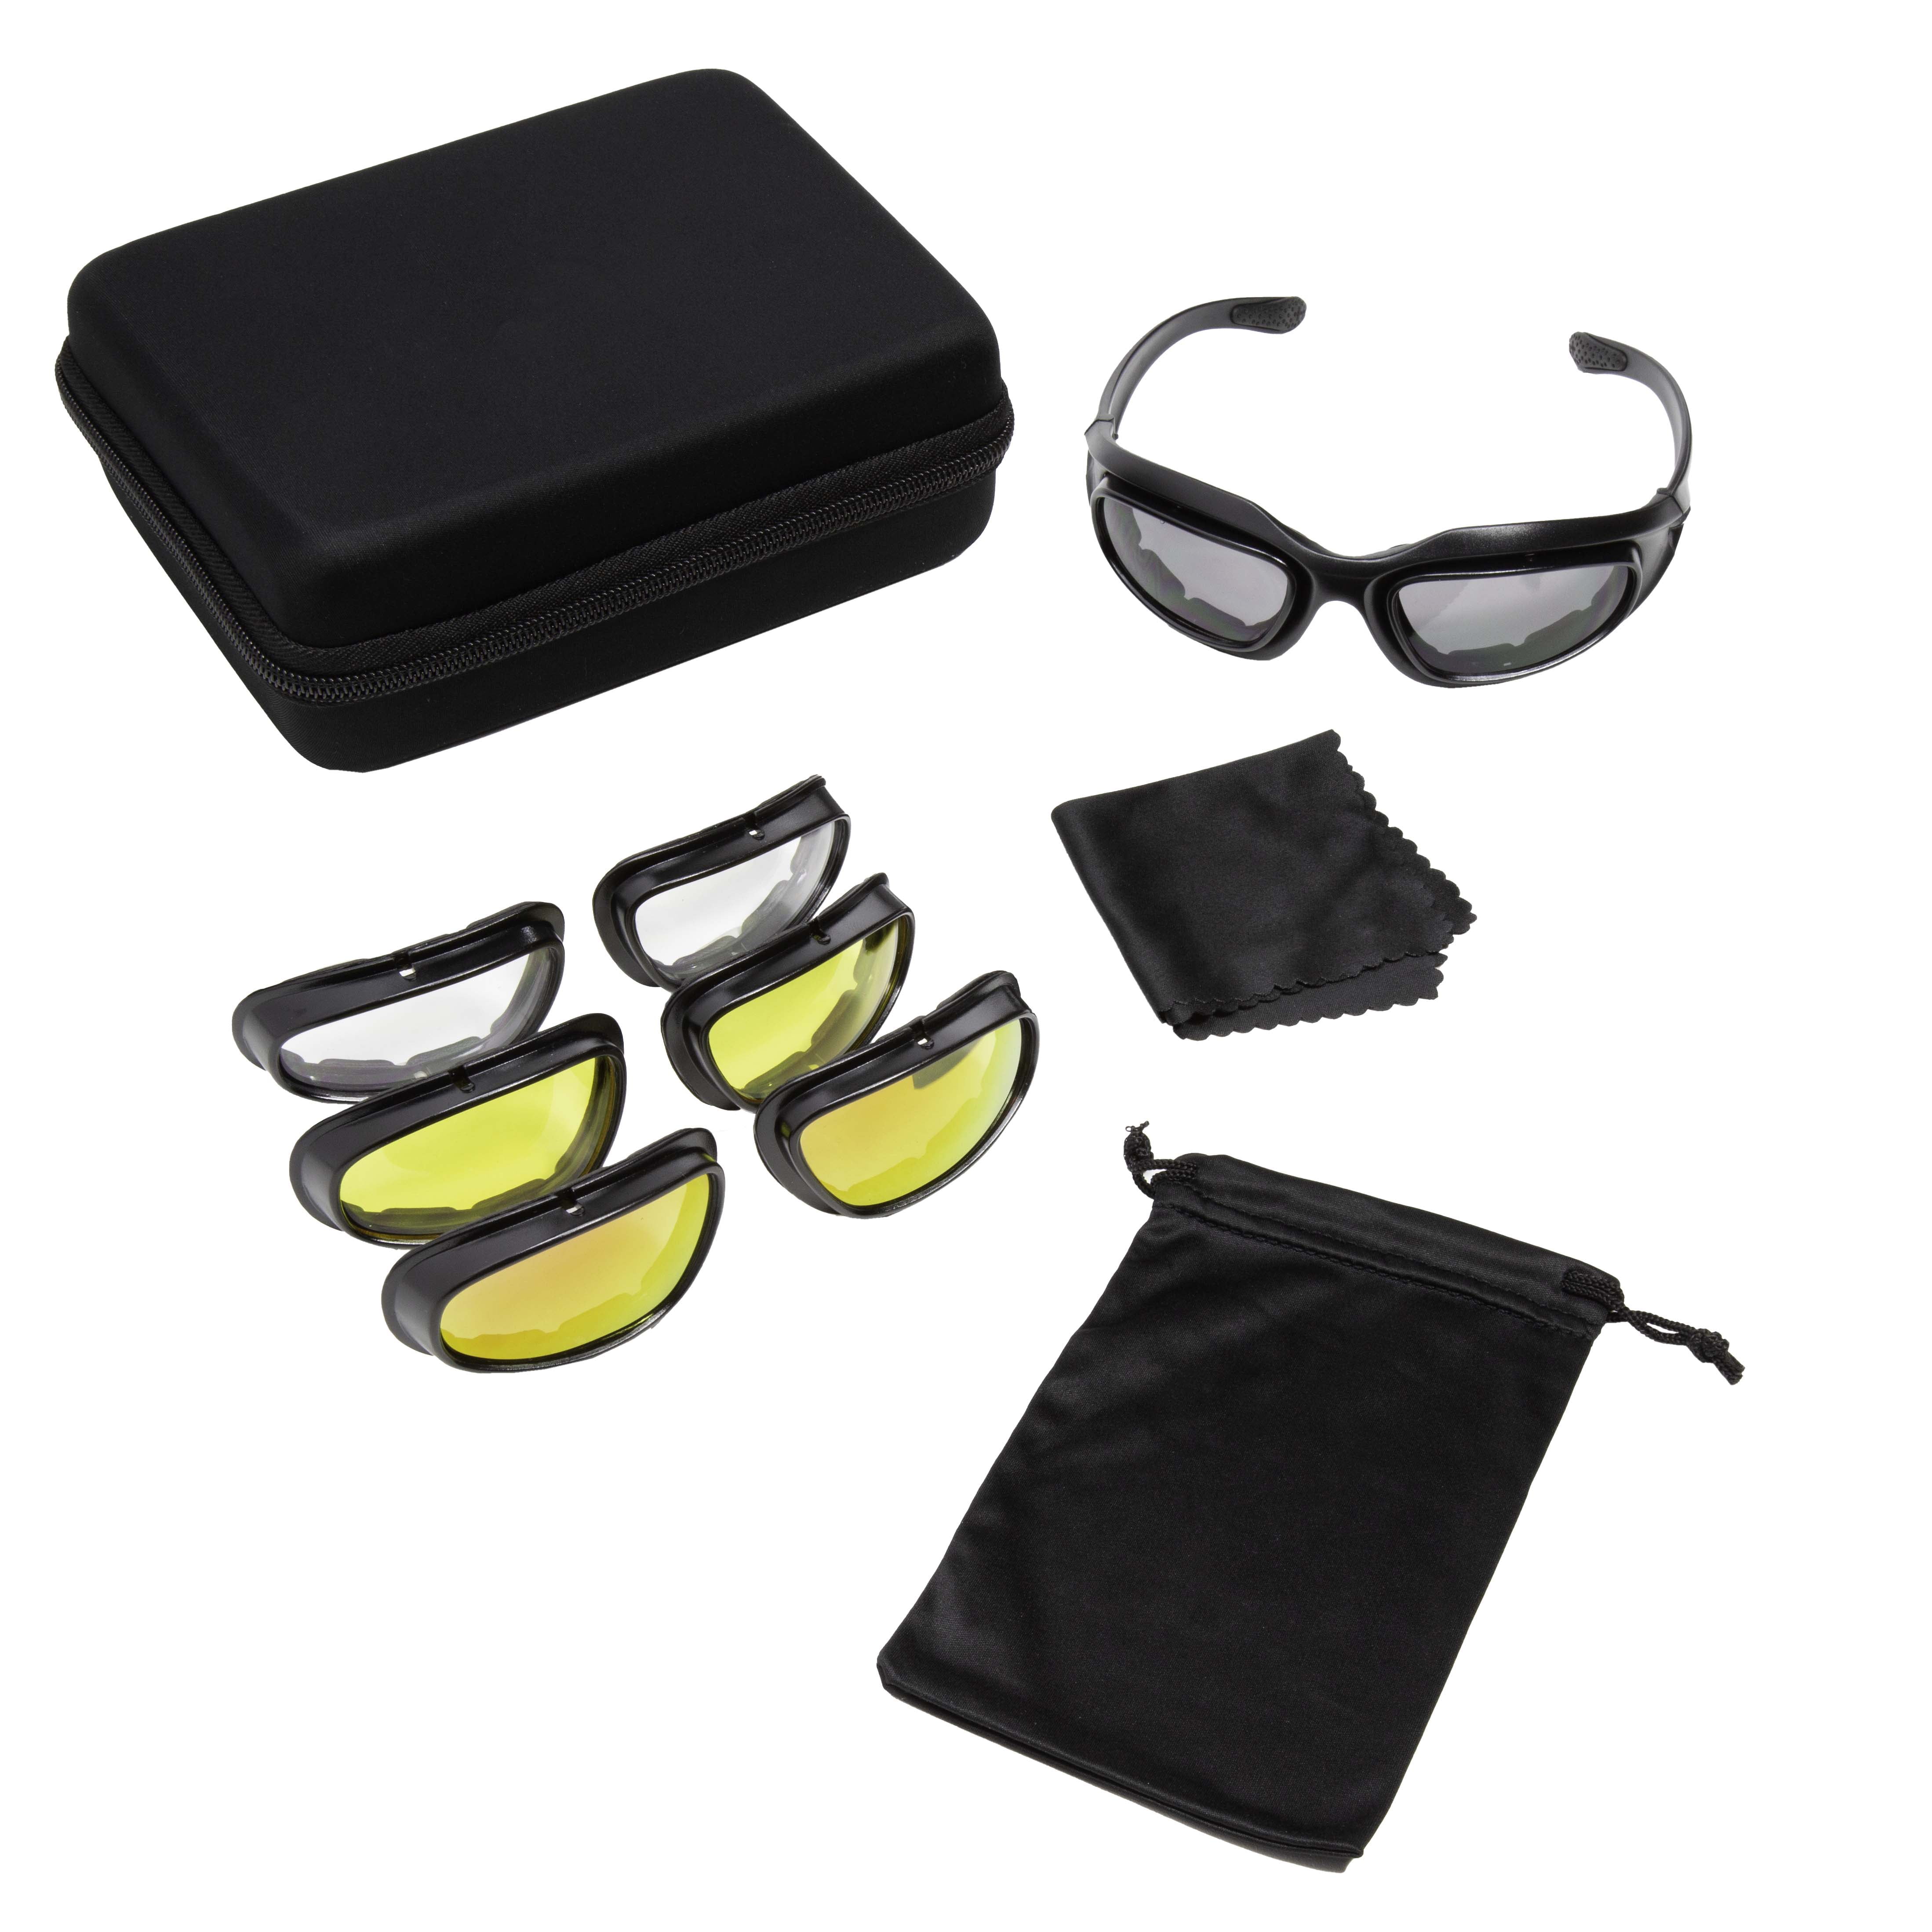 FUEL Adult MX ATV off-road Premium Riding Glasses Kit for Motorcycle, Moped, Cruiser, Scooter (4 Lens Options)